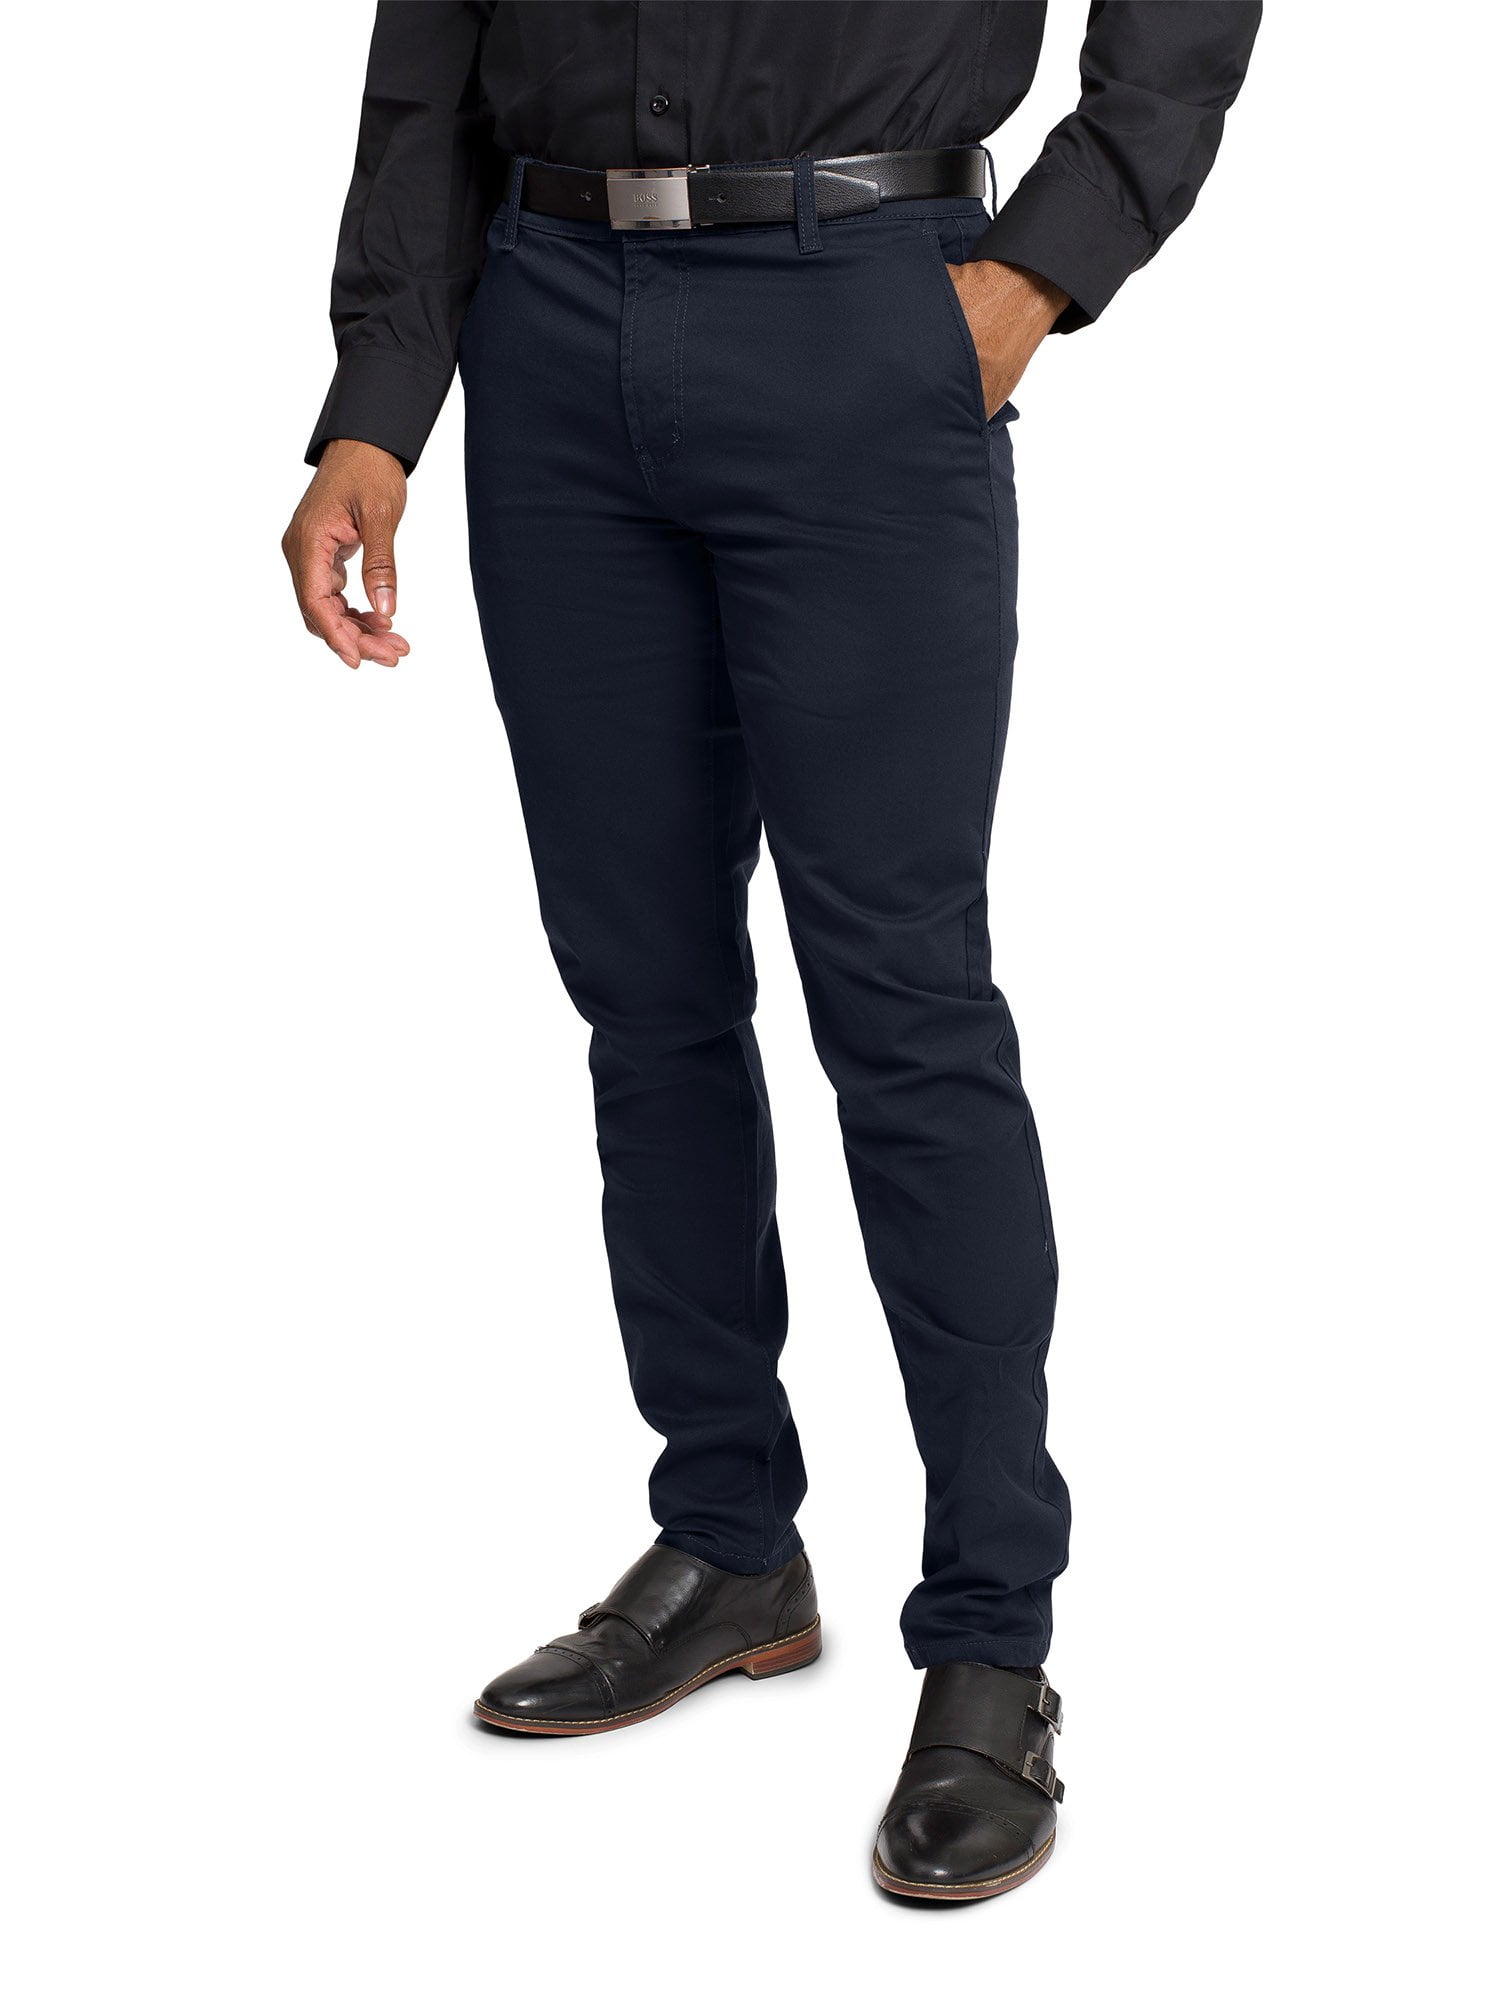 Men Slim Fit Stretch Chino Trousers Casual Formal Business Straight Leg Pants 